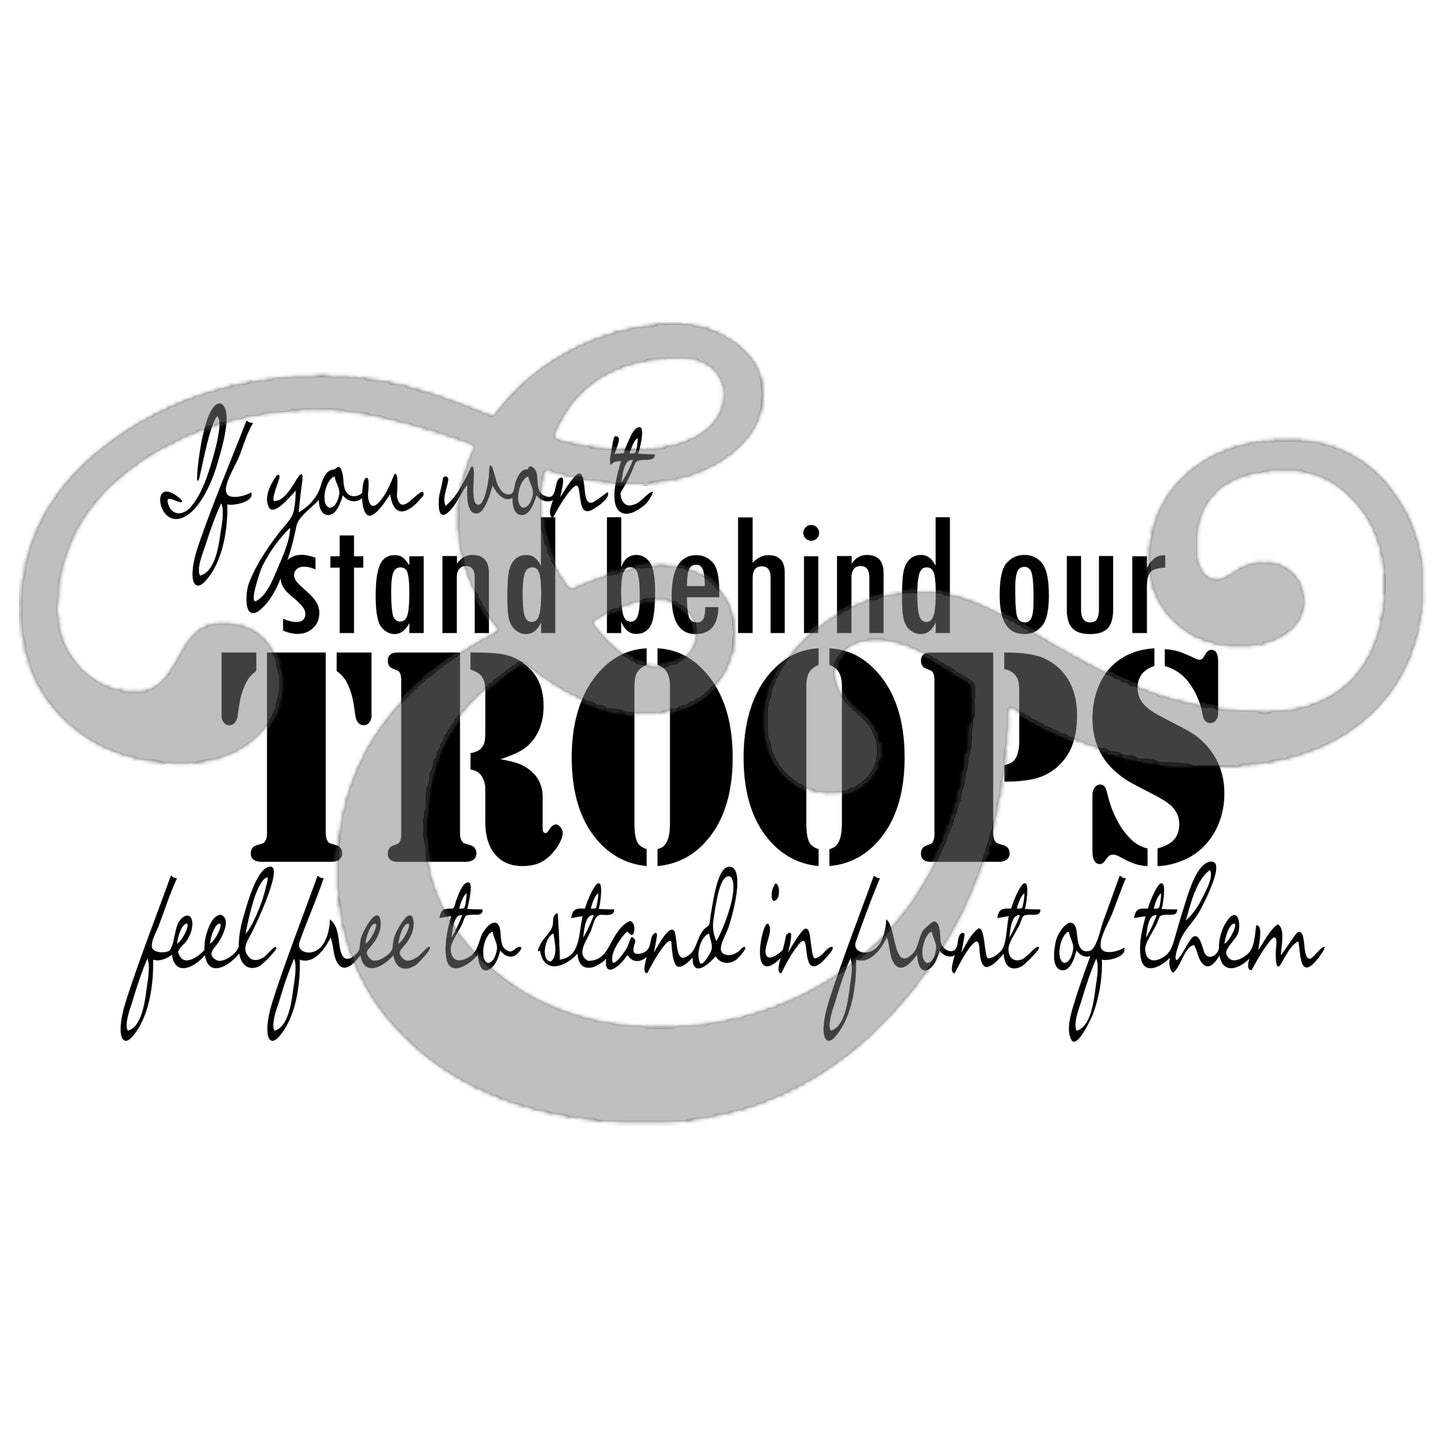 If Won't Stand Behind Behind Our Troops Feel Free To Stand In Front Of Them Sublimation Transfer (6683646197838)